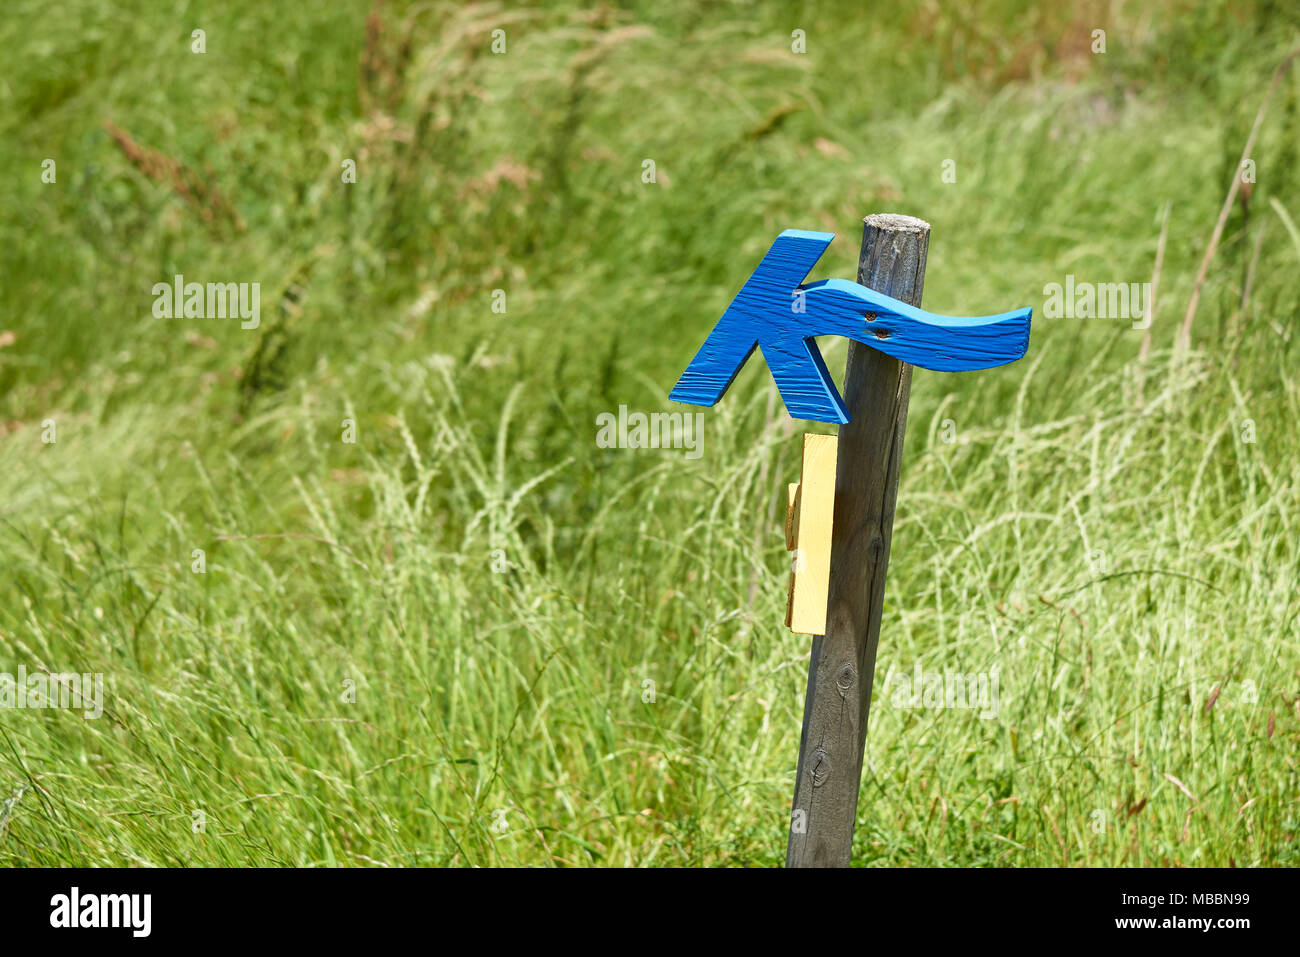 Jeju, Korea - May 26, 2017: Jeju Olle trail direction sign. The trail is a famous long-distance foot path on Jeju island. The routes are mostly follow Stock Photo